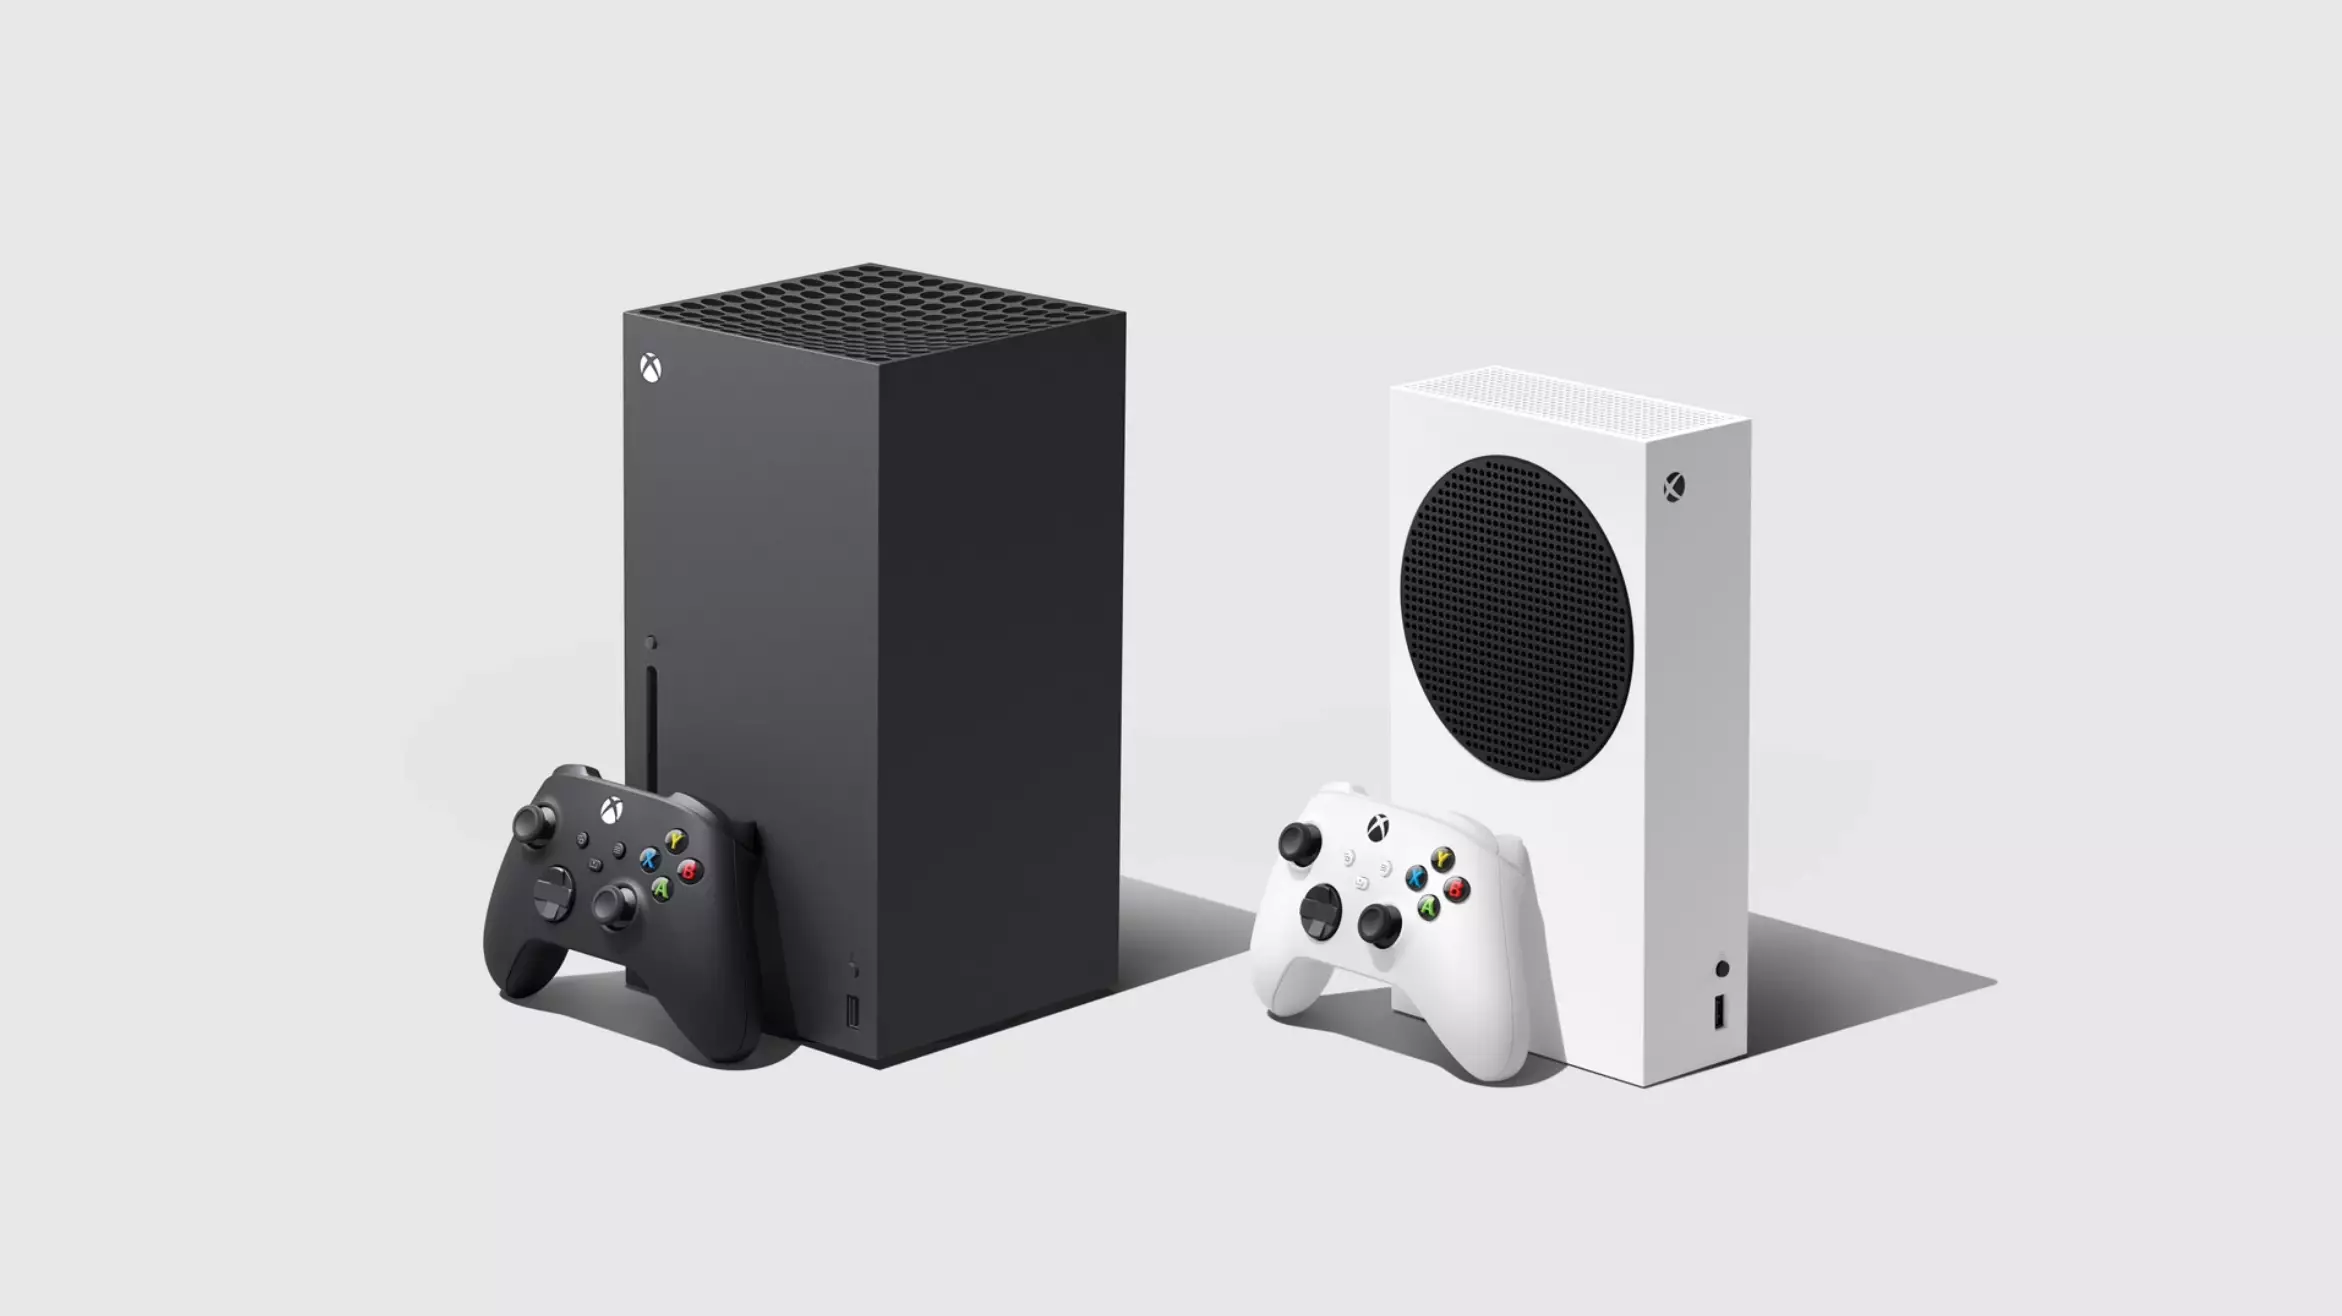 The Xbox Series X and the Xbox Series S /